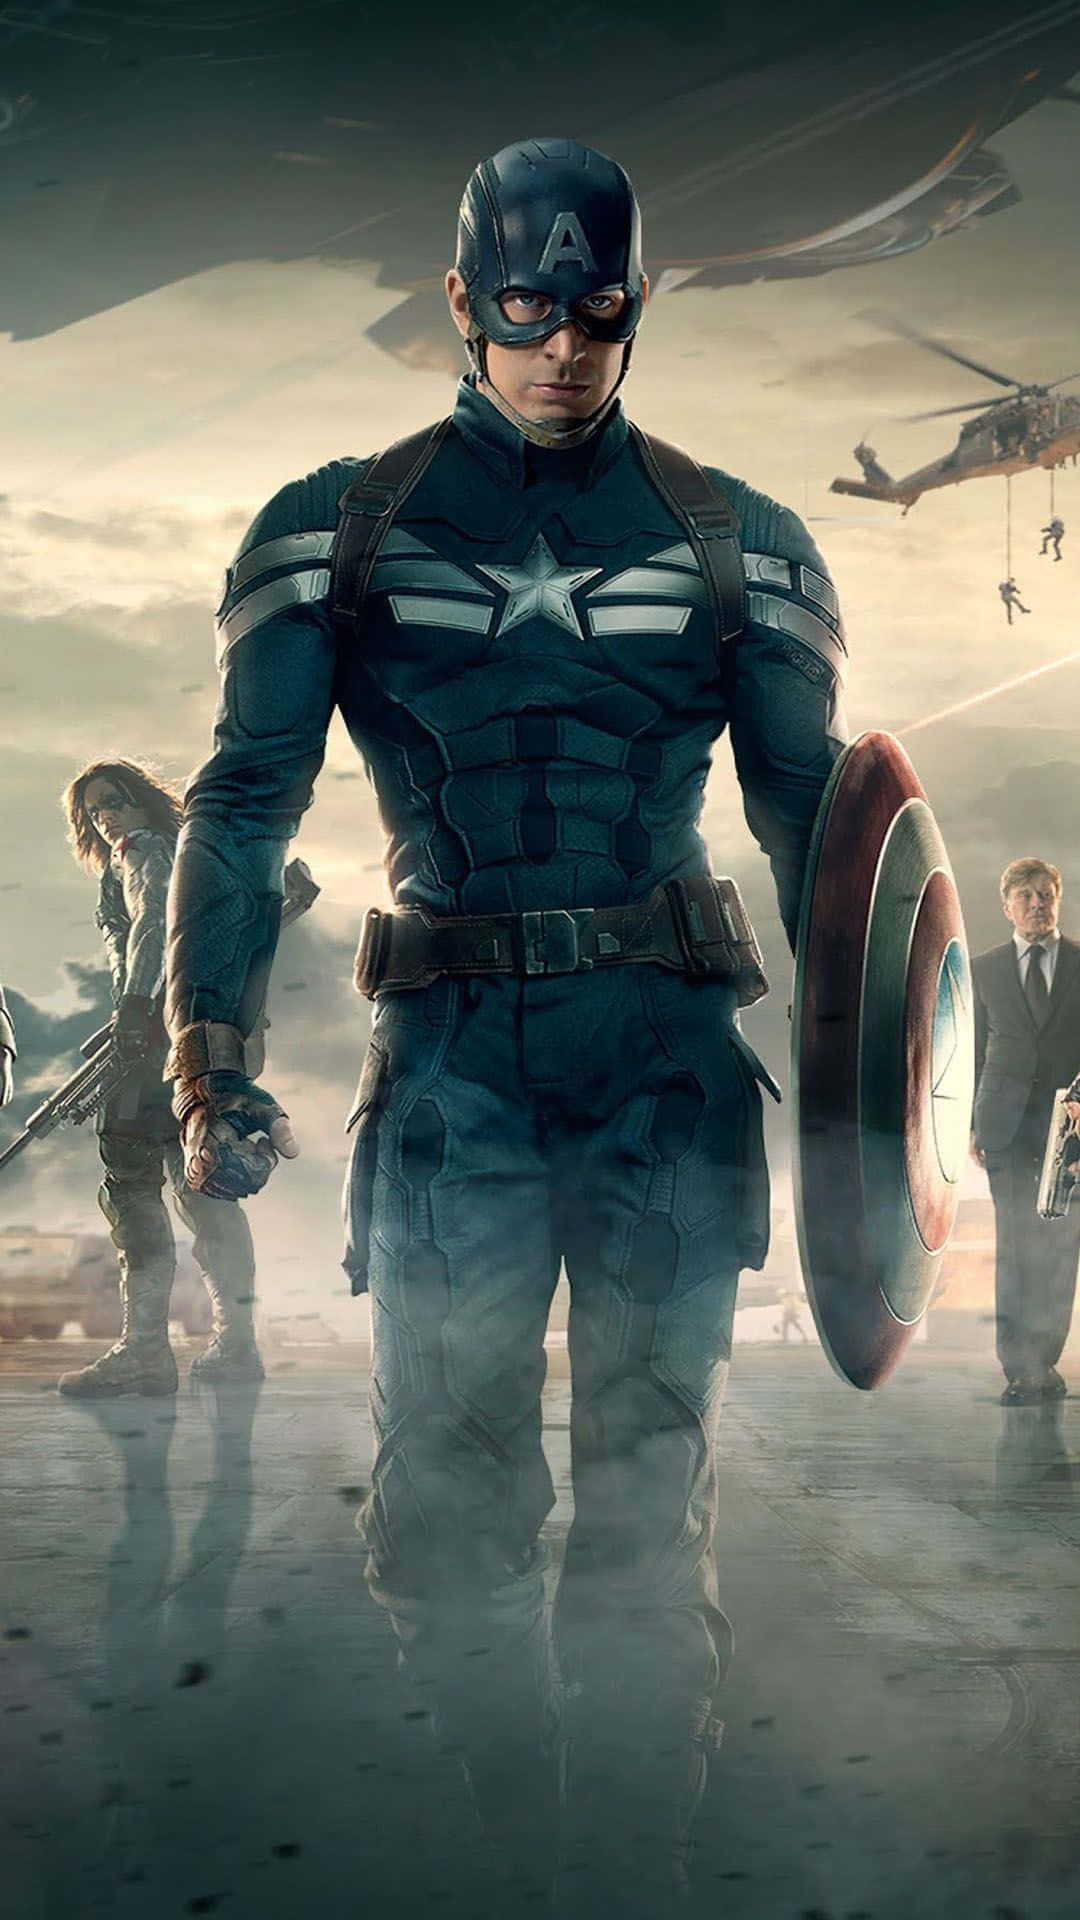 Get Ready for Thrilling Adventures with Captain America